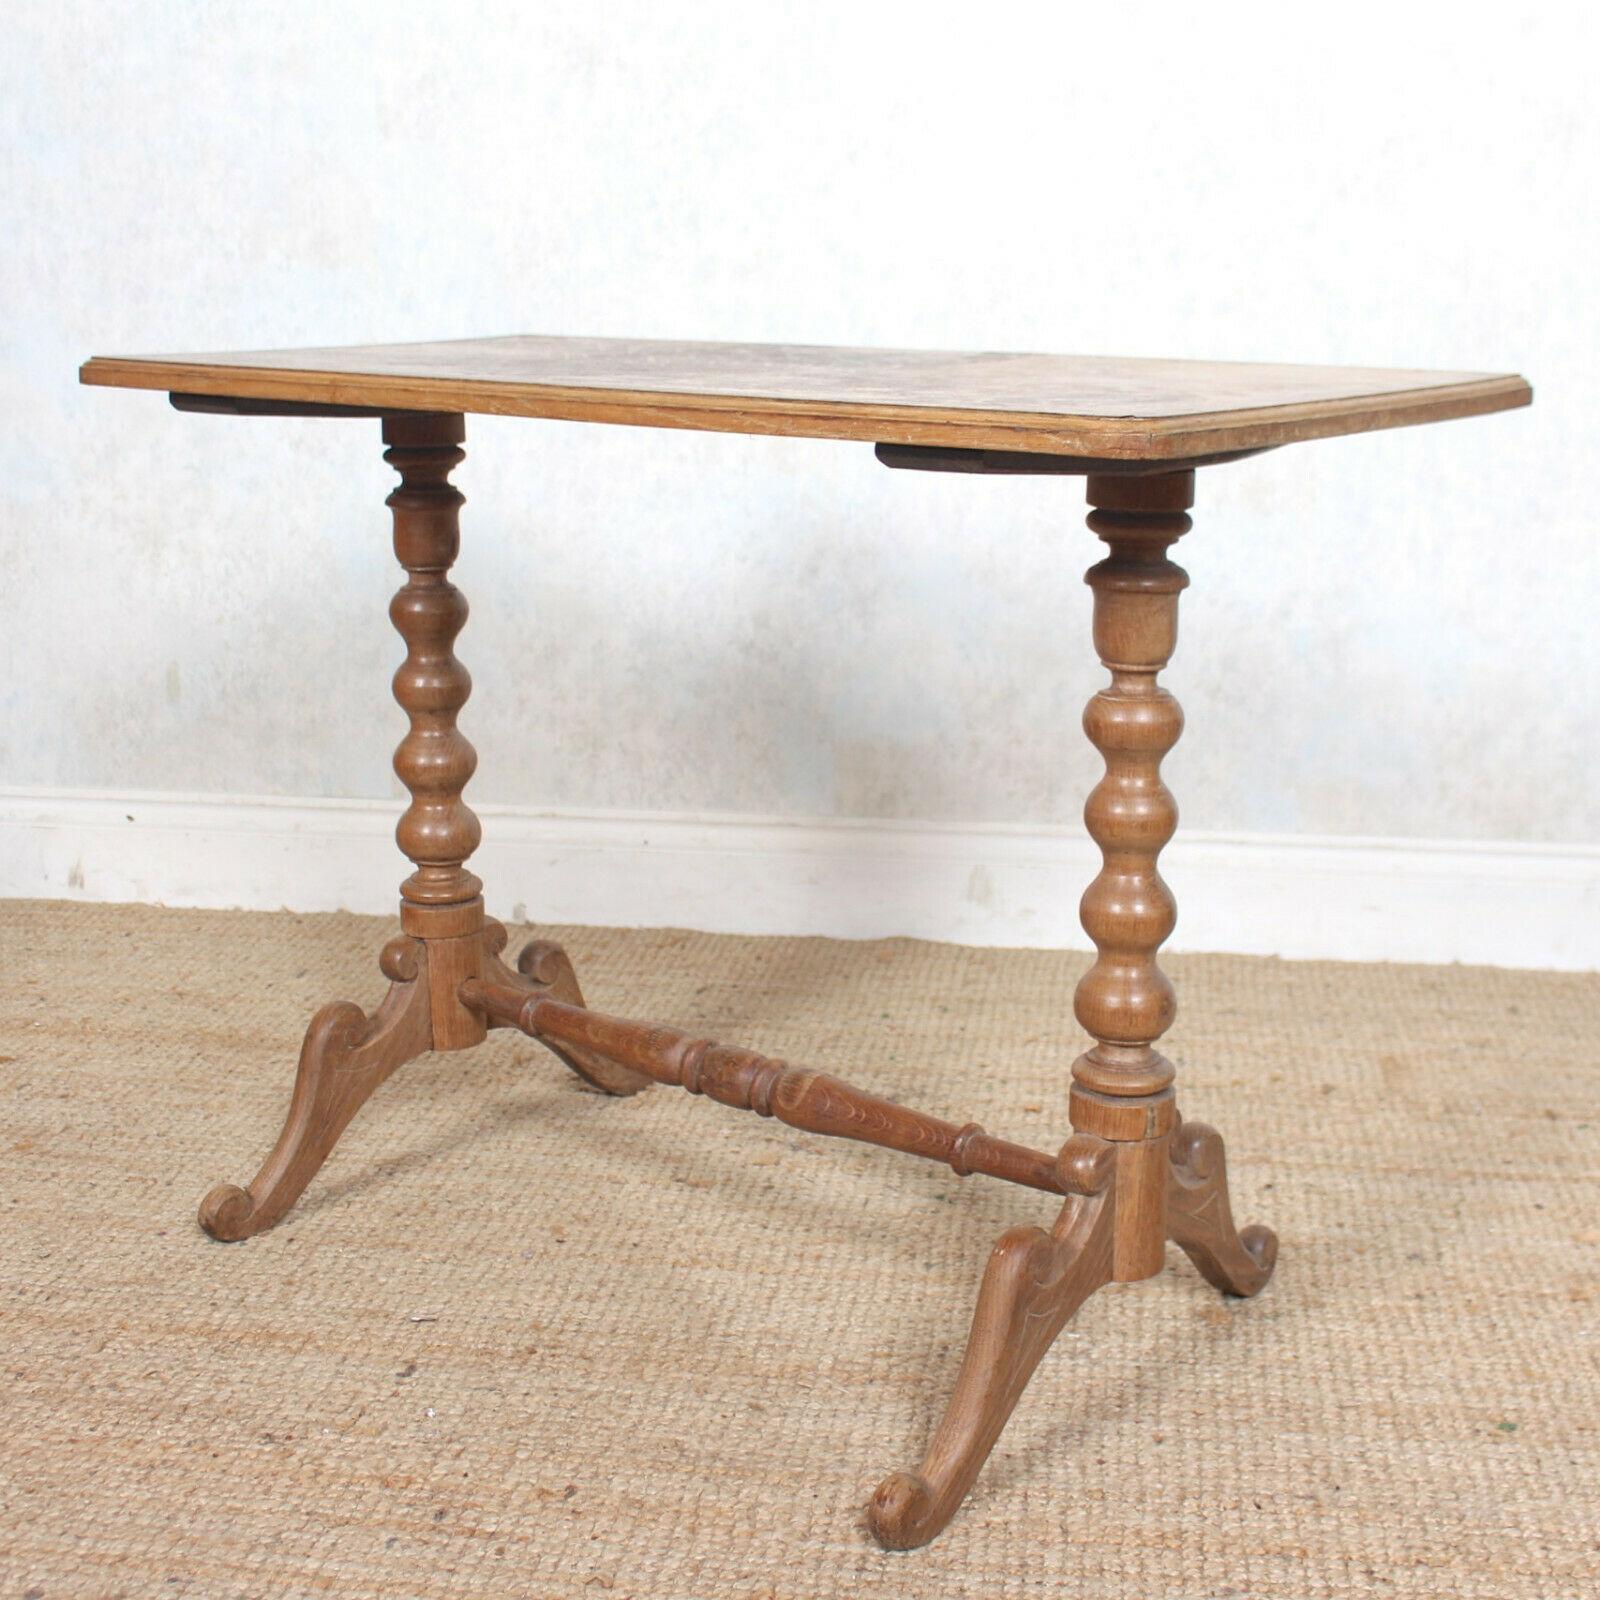 English Desk Writing Table Light Oak 19th Century Card Console Table In Good Condition For Sale In Newcastle upon Tyne, GB